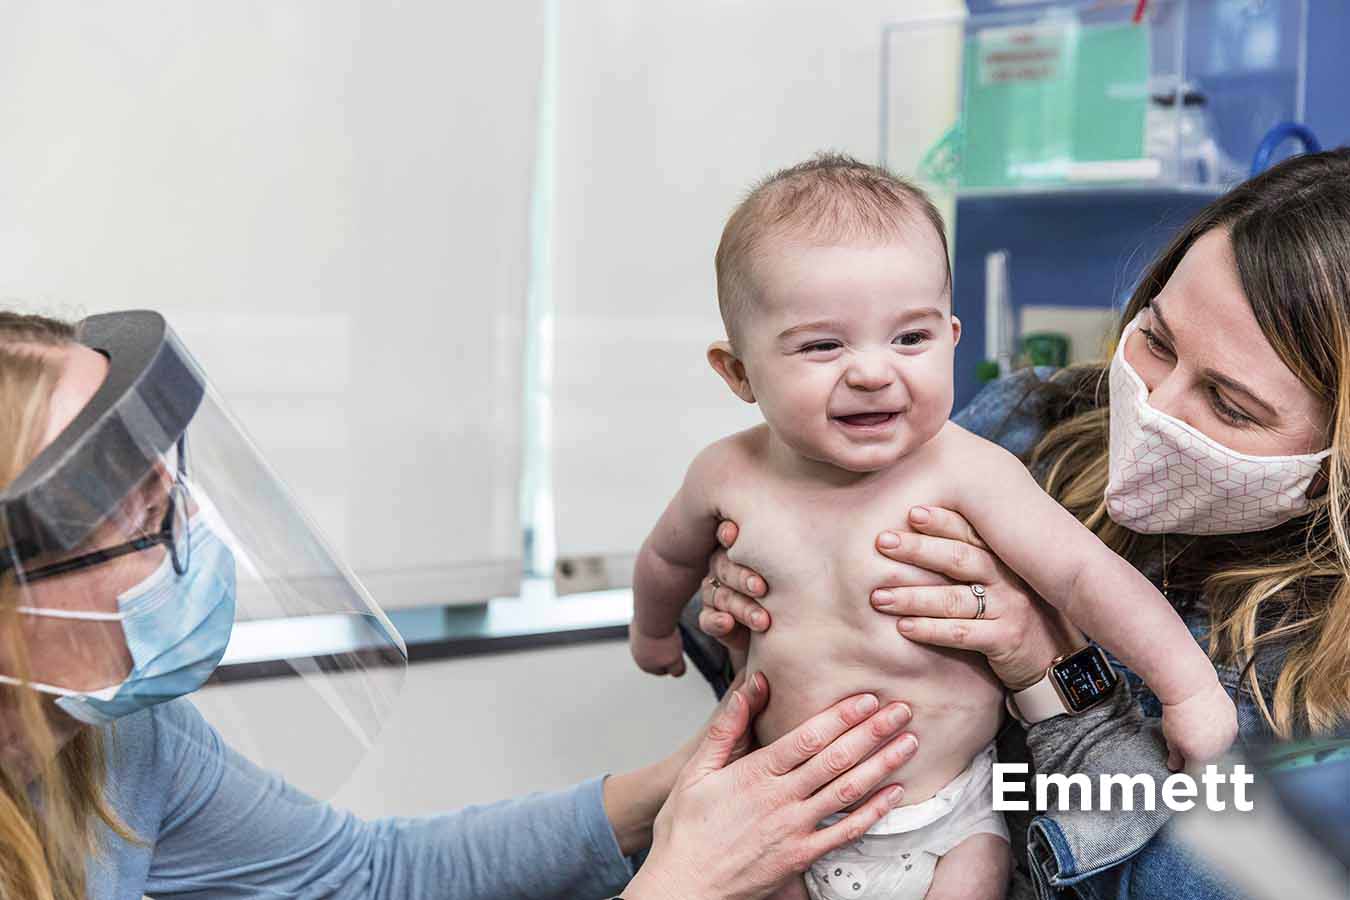 Emmett, a patient at Seattle Children's who was born with a congenital diaphragmatic hernia